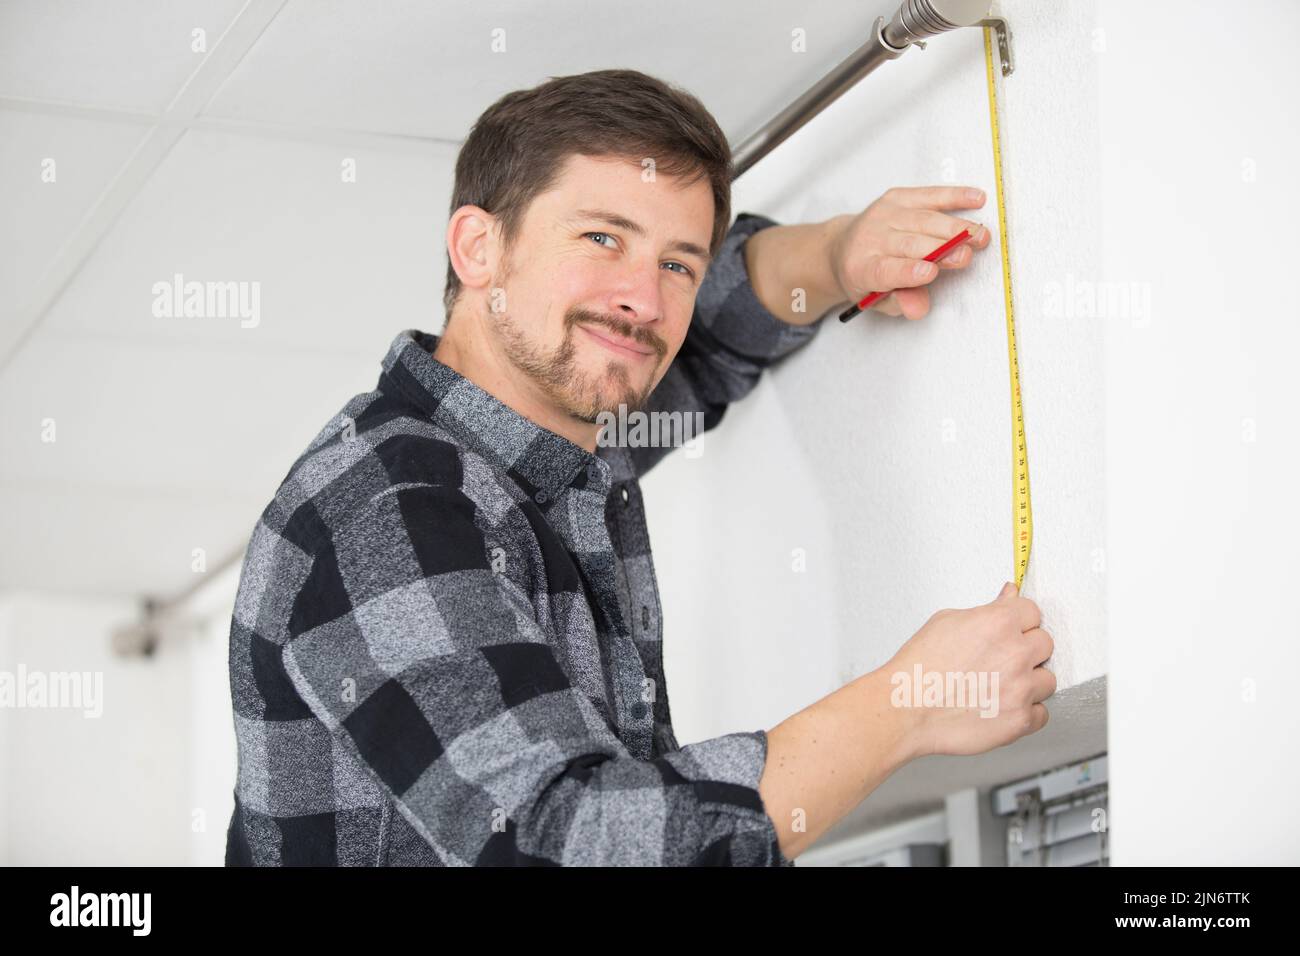 man is measuring vertical blinds Stock Photo